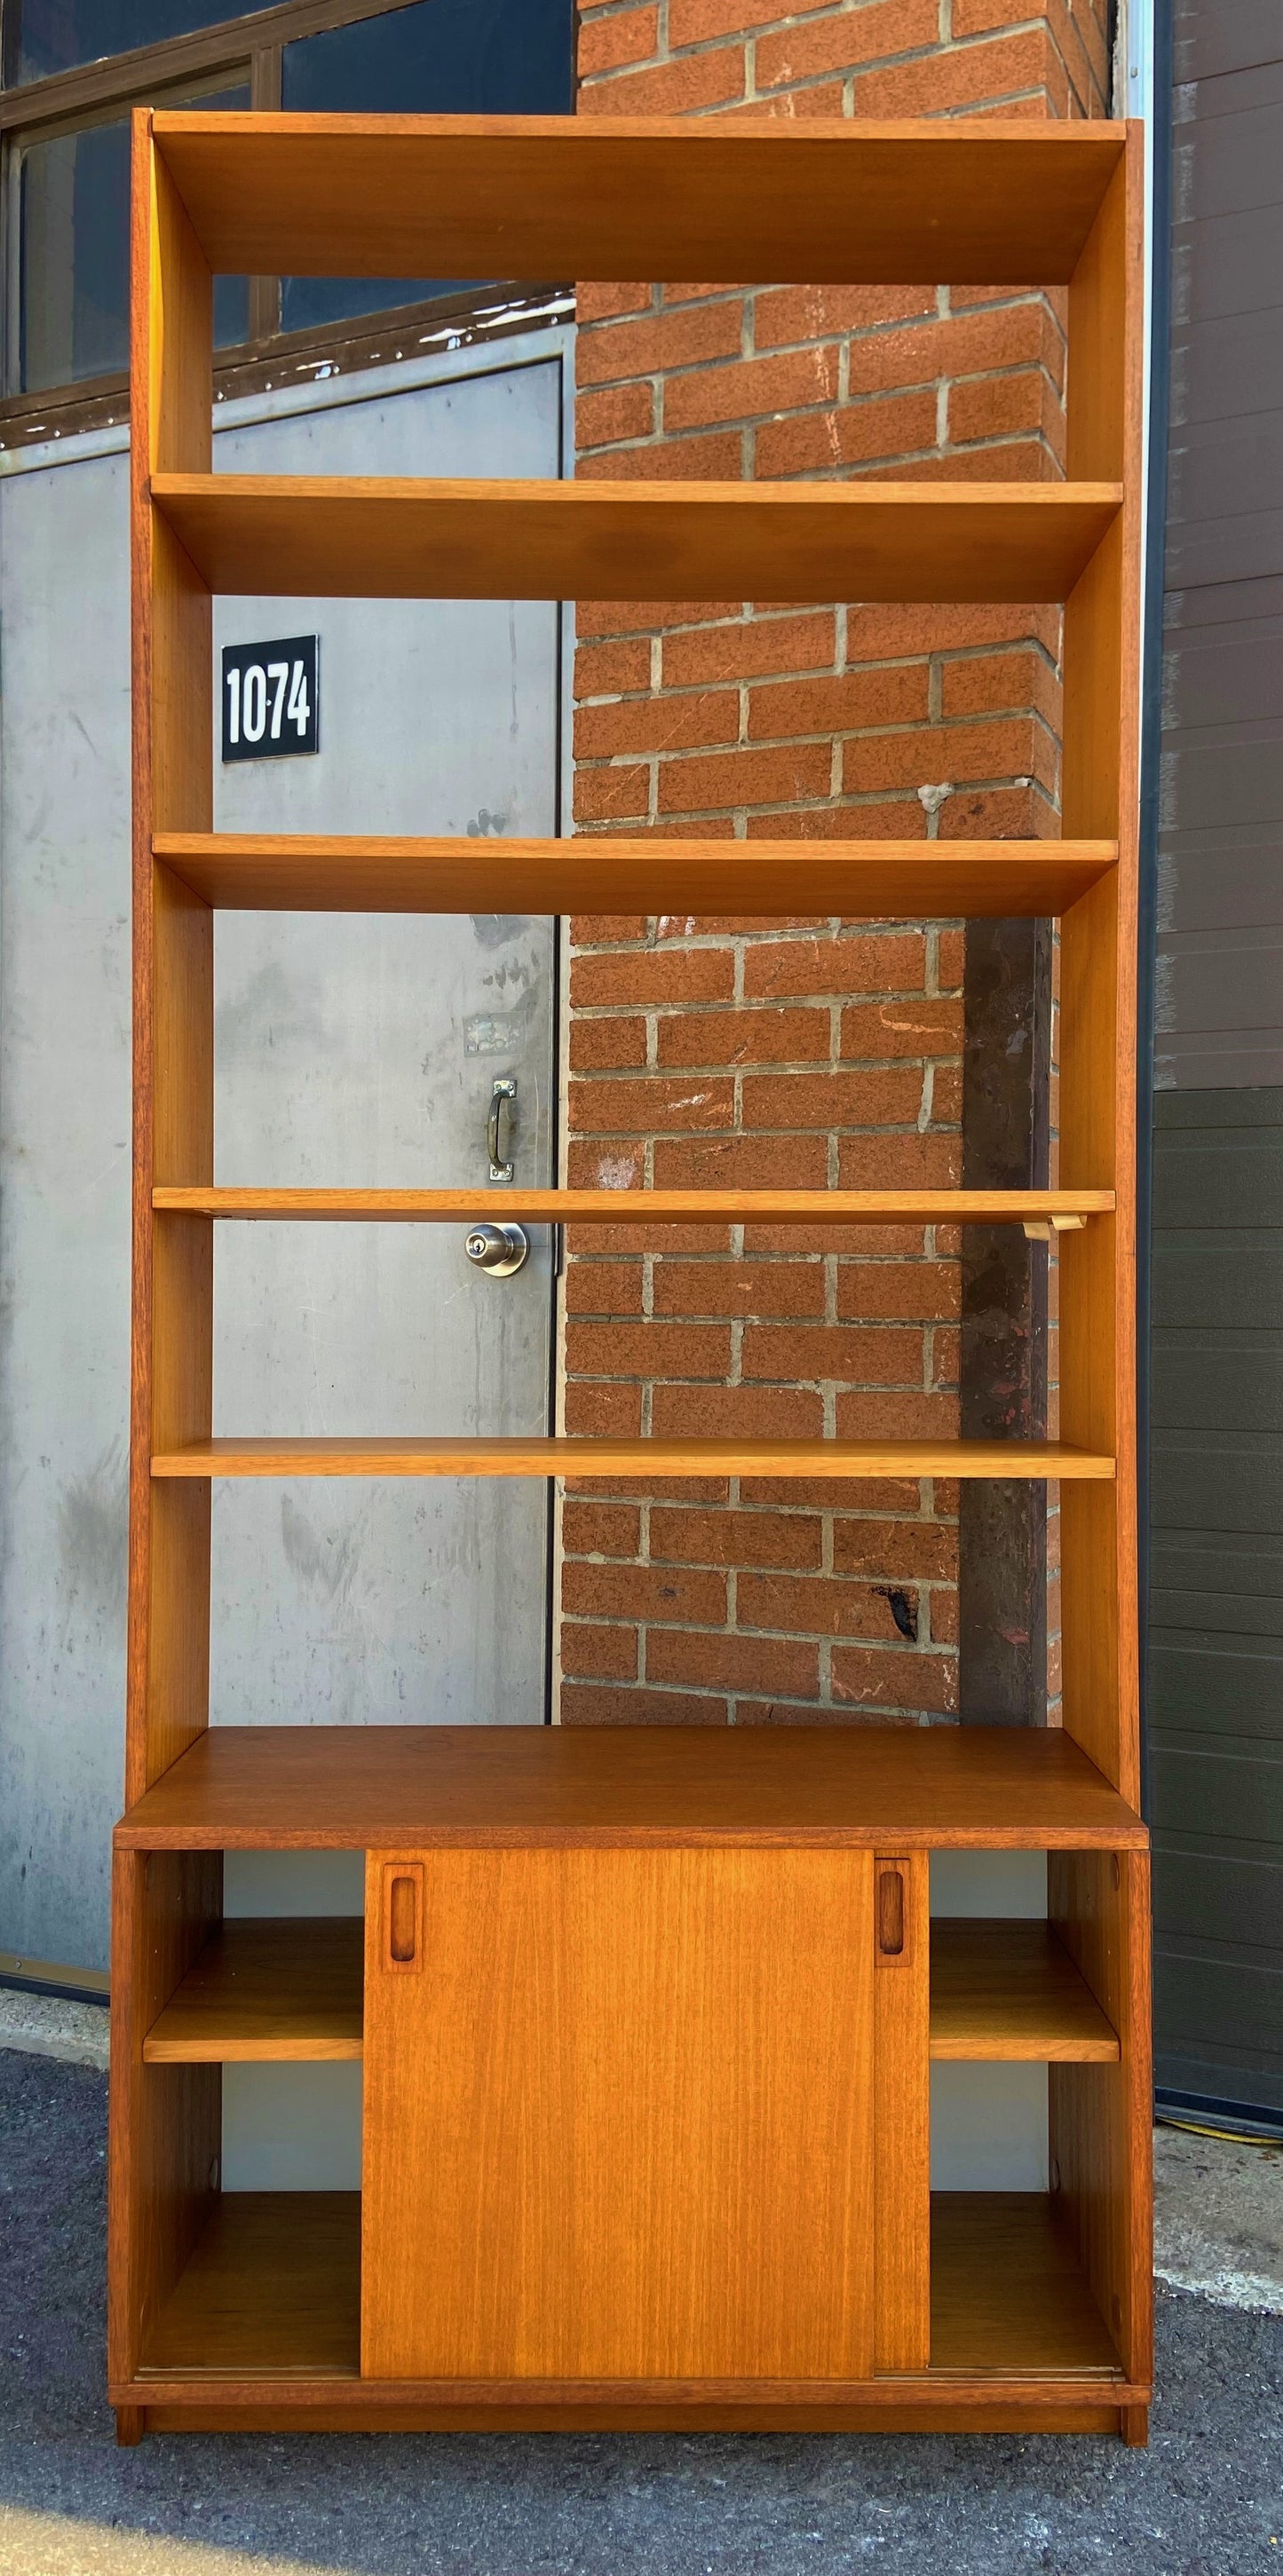 REFINISHED Mid Century Modern Teak Shelving Unit, made in Finland